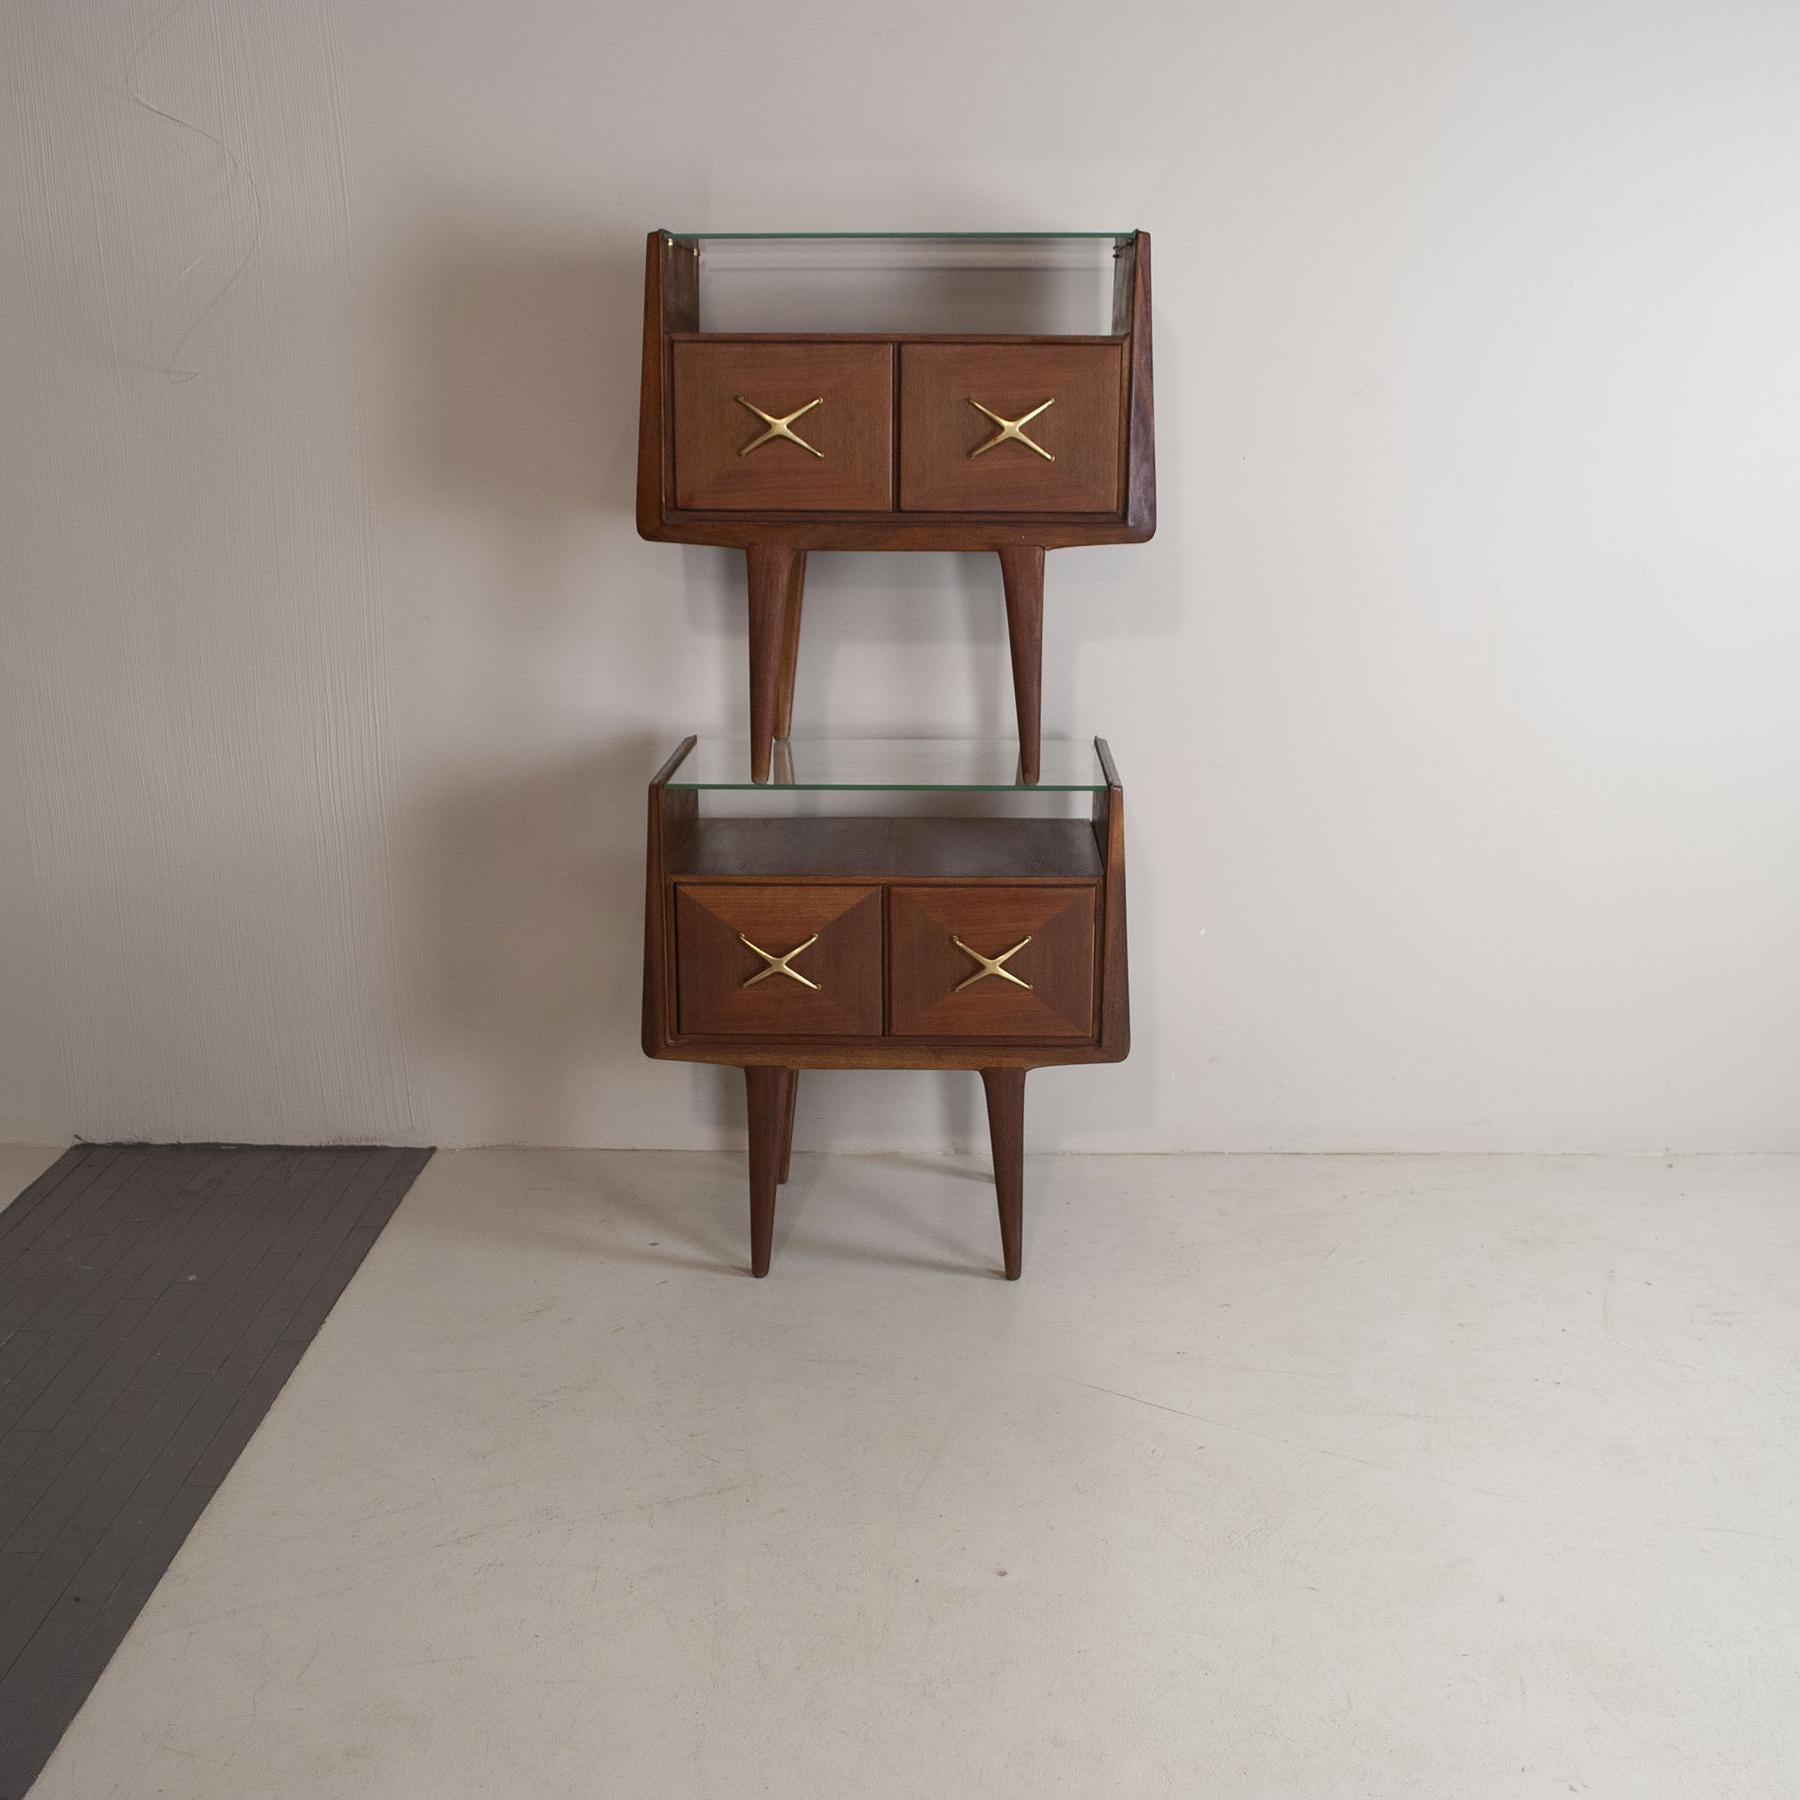 Walnut Gio Ponti Nighstands in Wood from Early Fifties